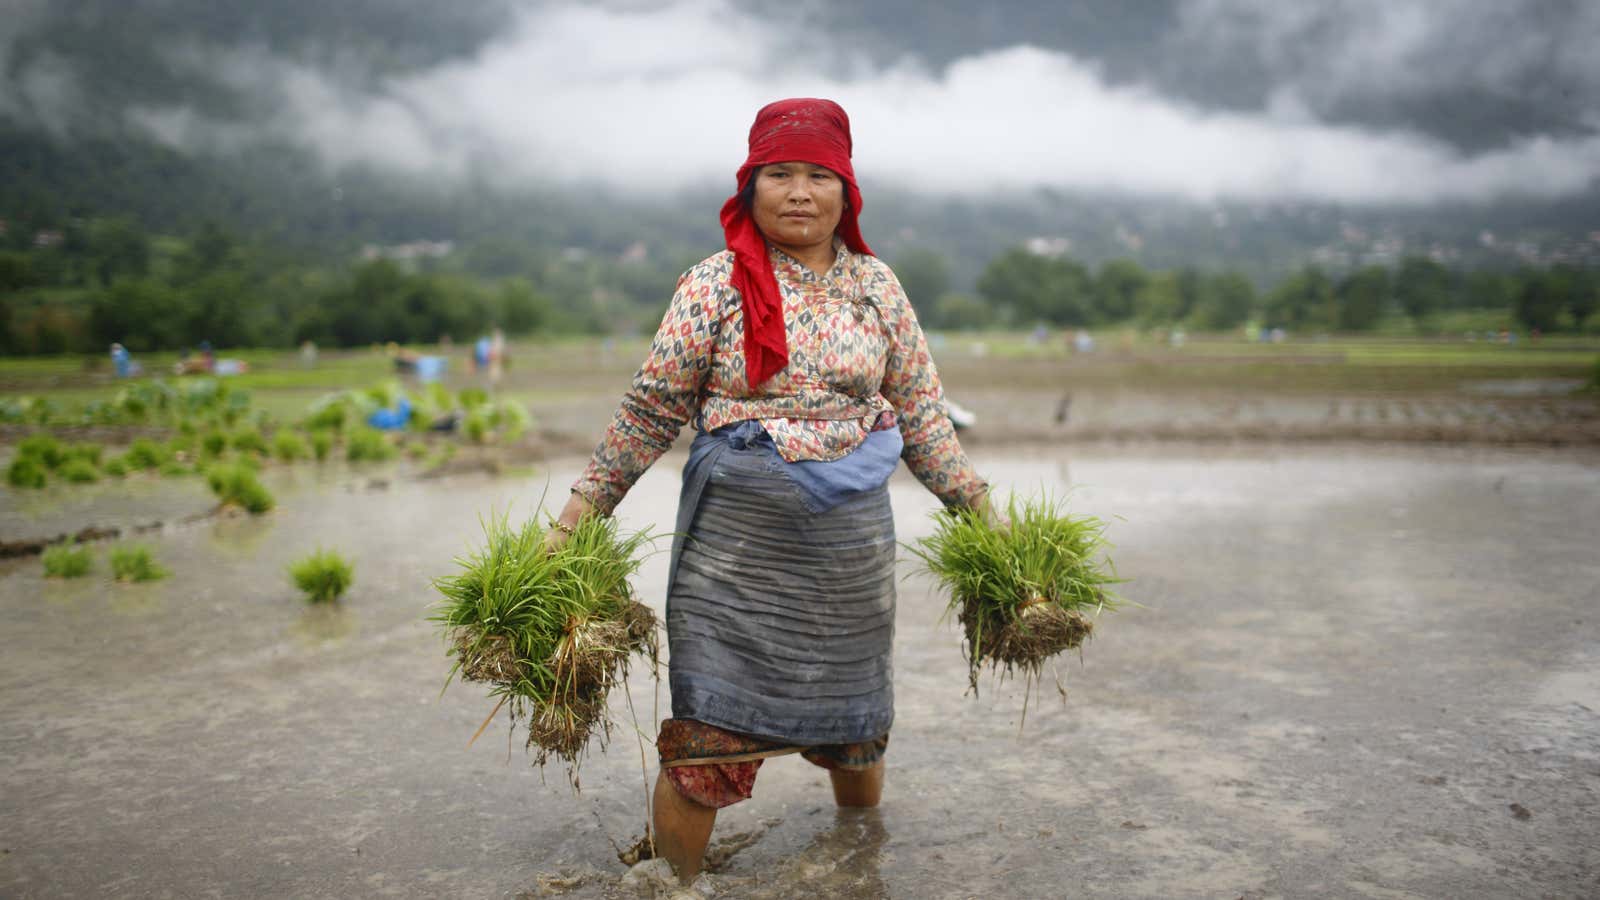 Female subsistence farmers in the developing world will bear the most severe impacts of climate change.